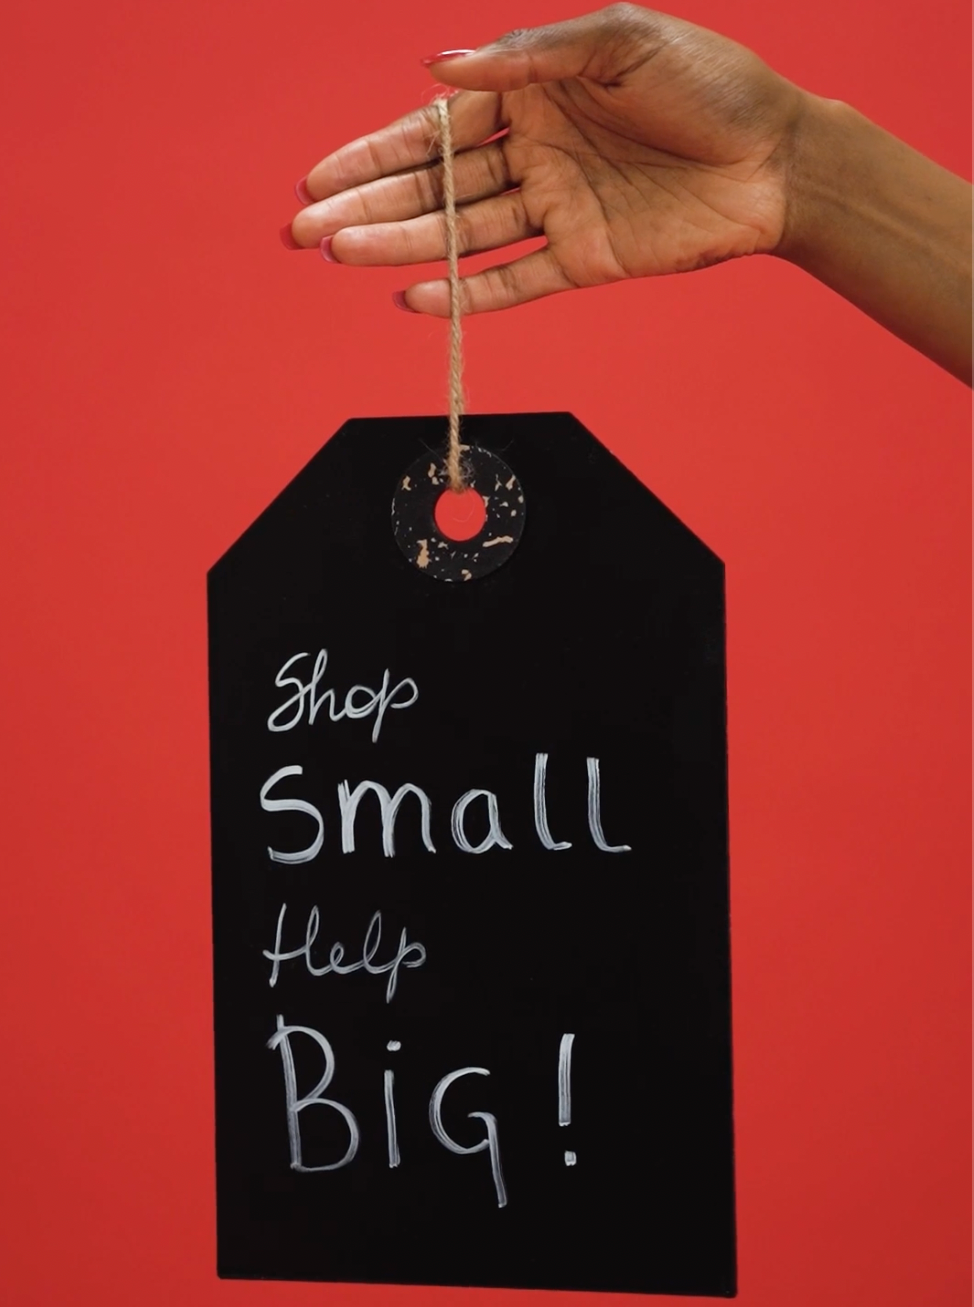 Shop Small , Shop Local TODAY!